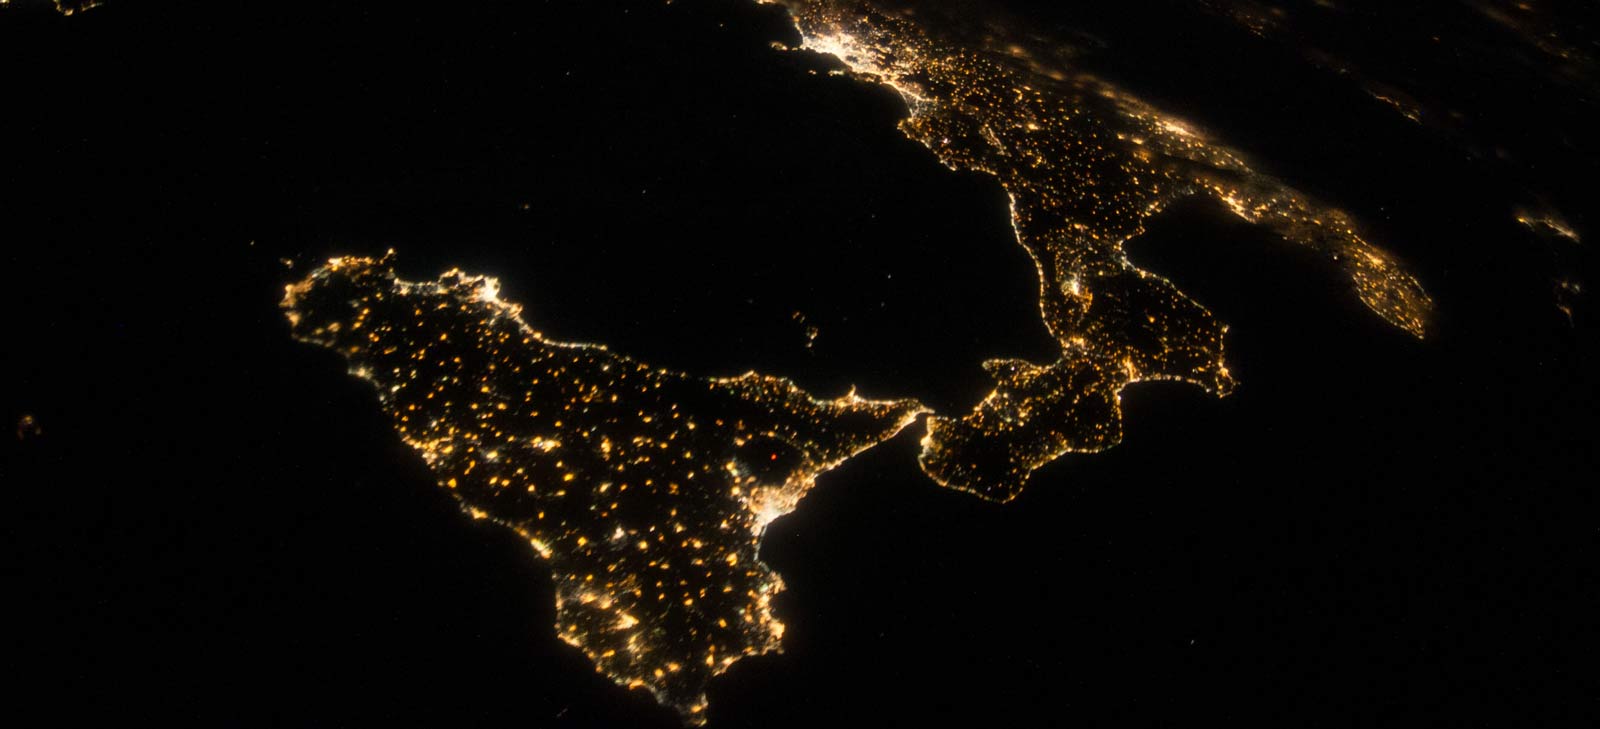 Sicily from space.